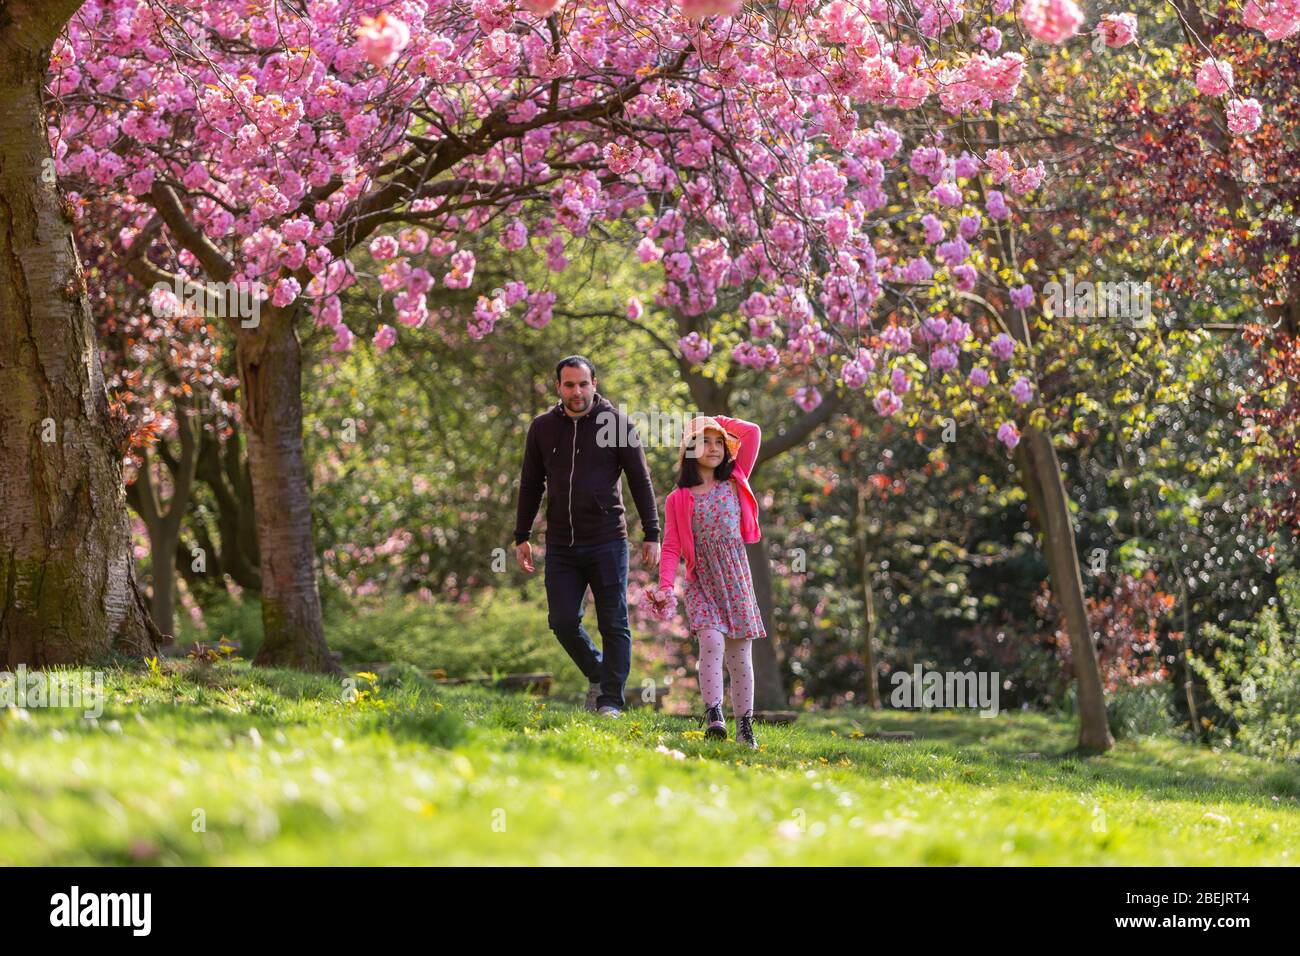 Cradley Heath, West Midlands, UK. 14th Apr, 2020. On a fine spring morning, nine-year-old Ellie-May takes her permitted exercise walk in her local park in Cradley Heath in the West Midlands with her dad Martin Hall, where they enjoy the beautiful pink blossom on the trees. Credit: Peter Lopeman/Alamy Live News Stock Photo